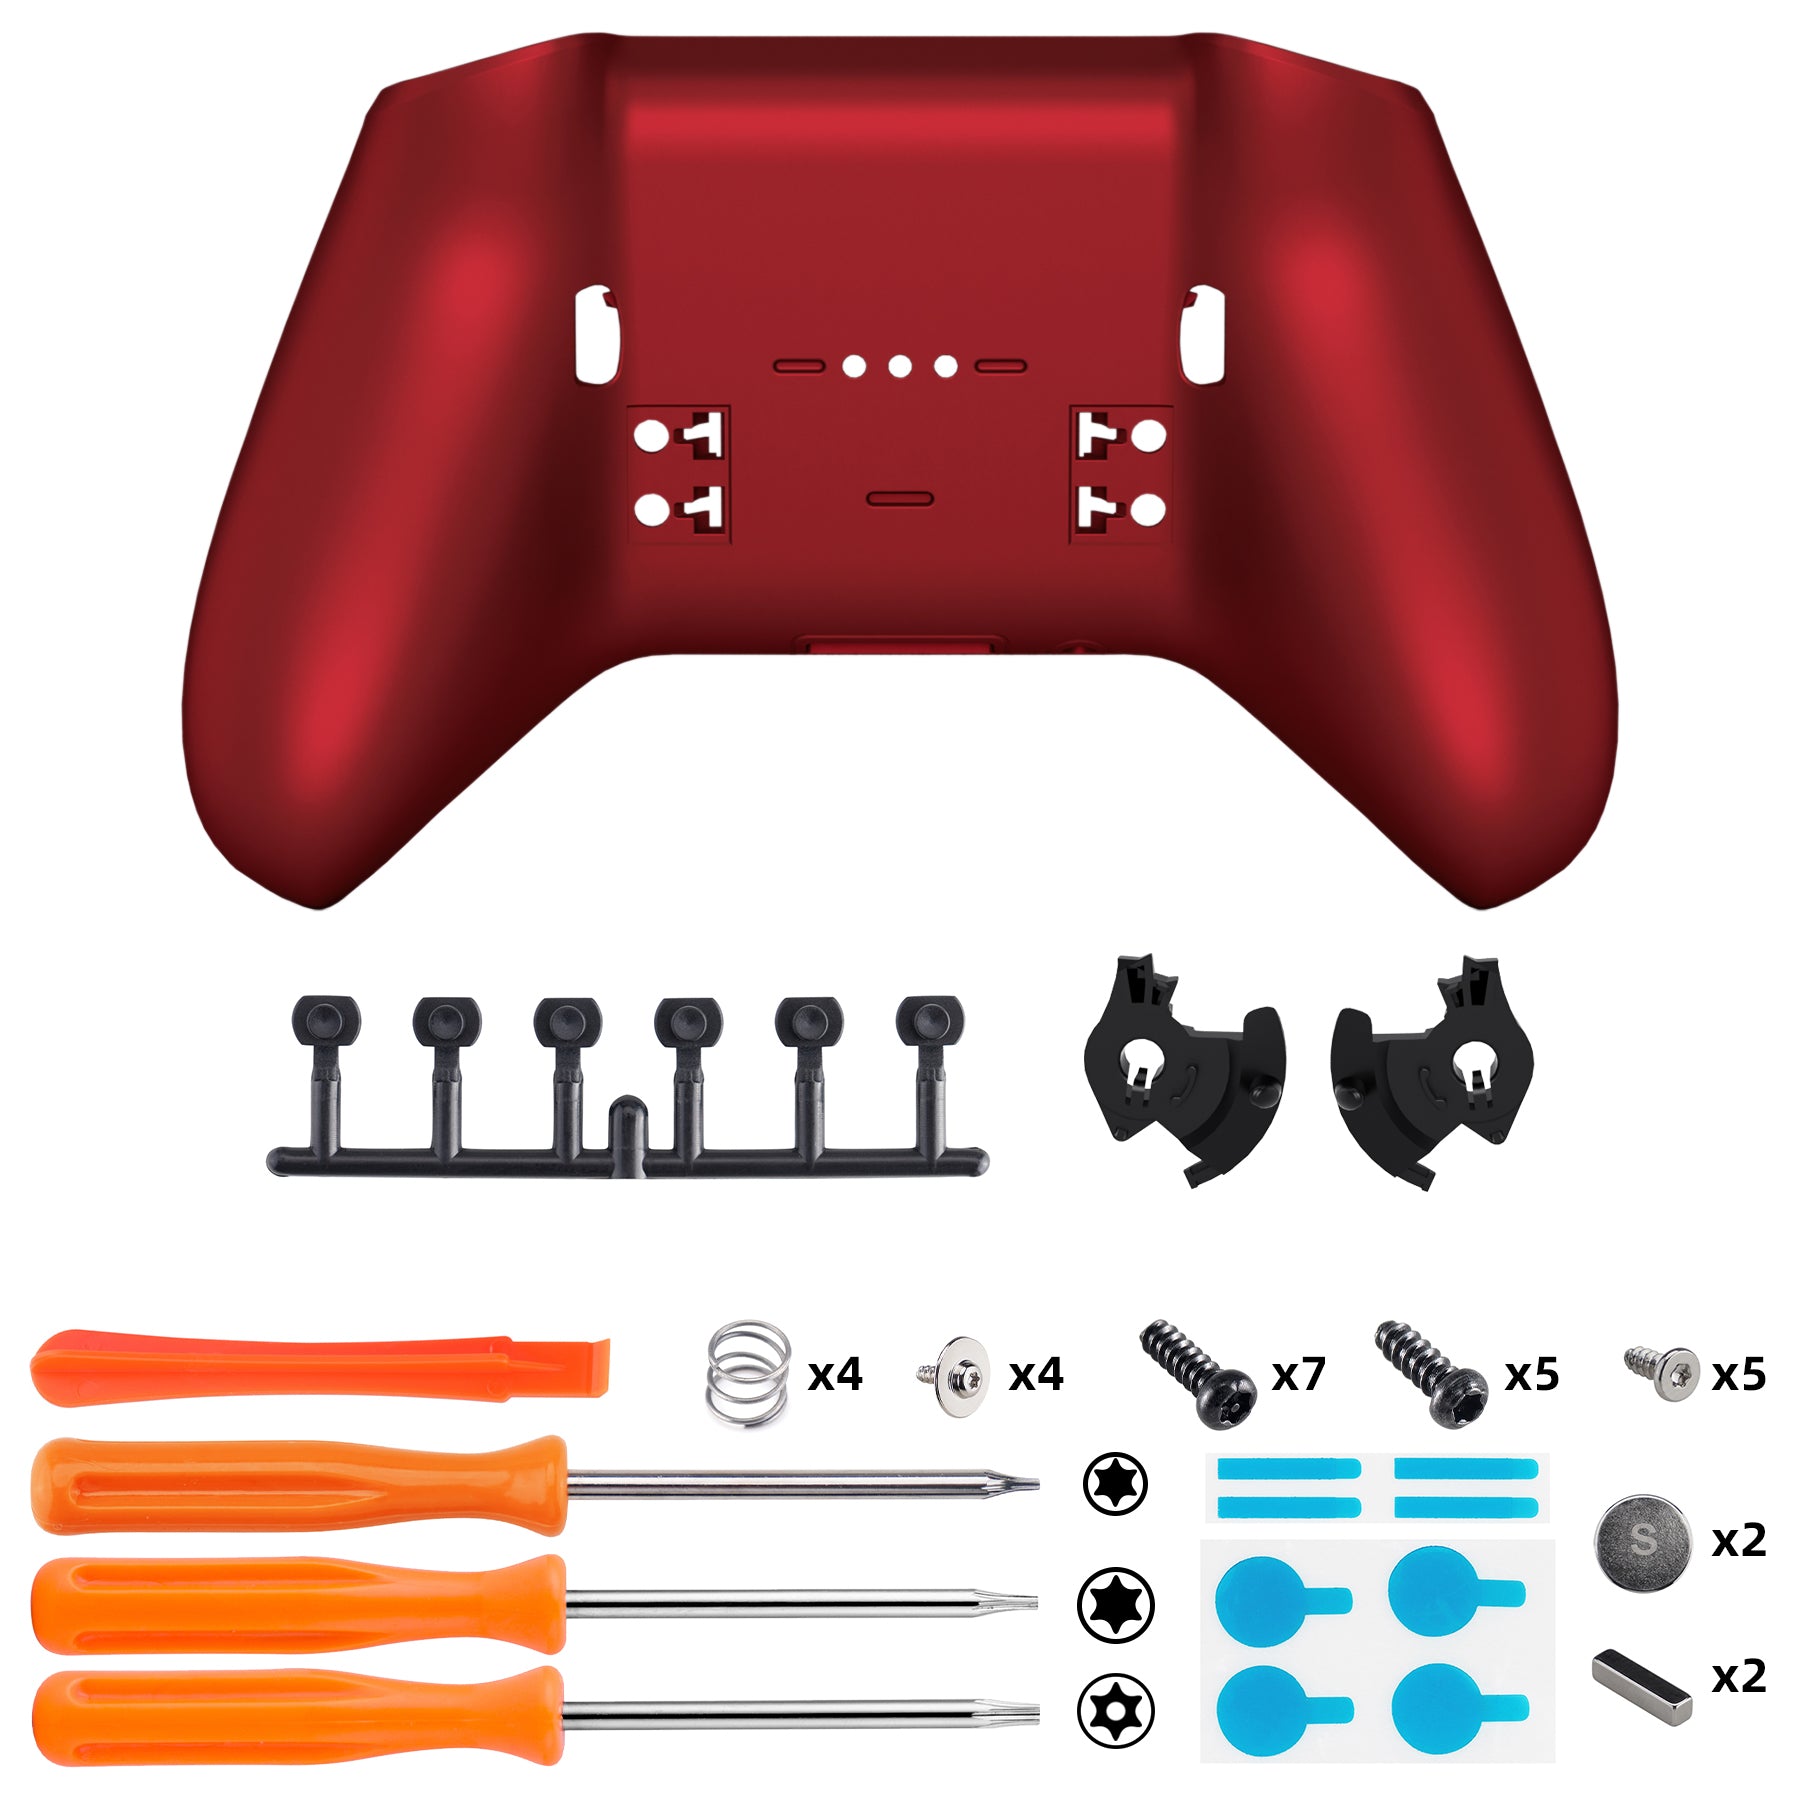 Replacement Bottom Shell Case for Xbox Elite Series 2 & Elite Series 2 Core Controller Model 1797 - Scarlet Red eXtremeRate